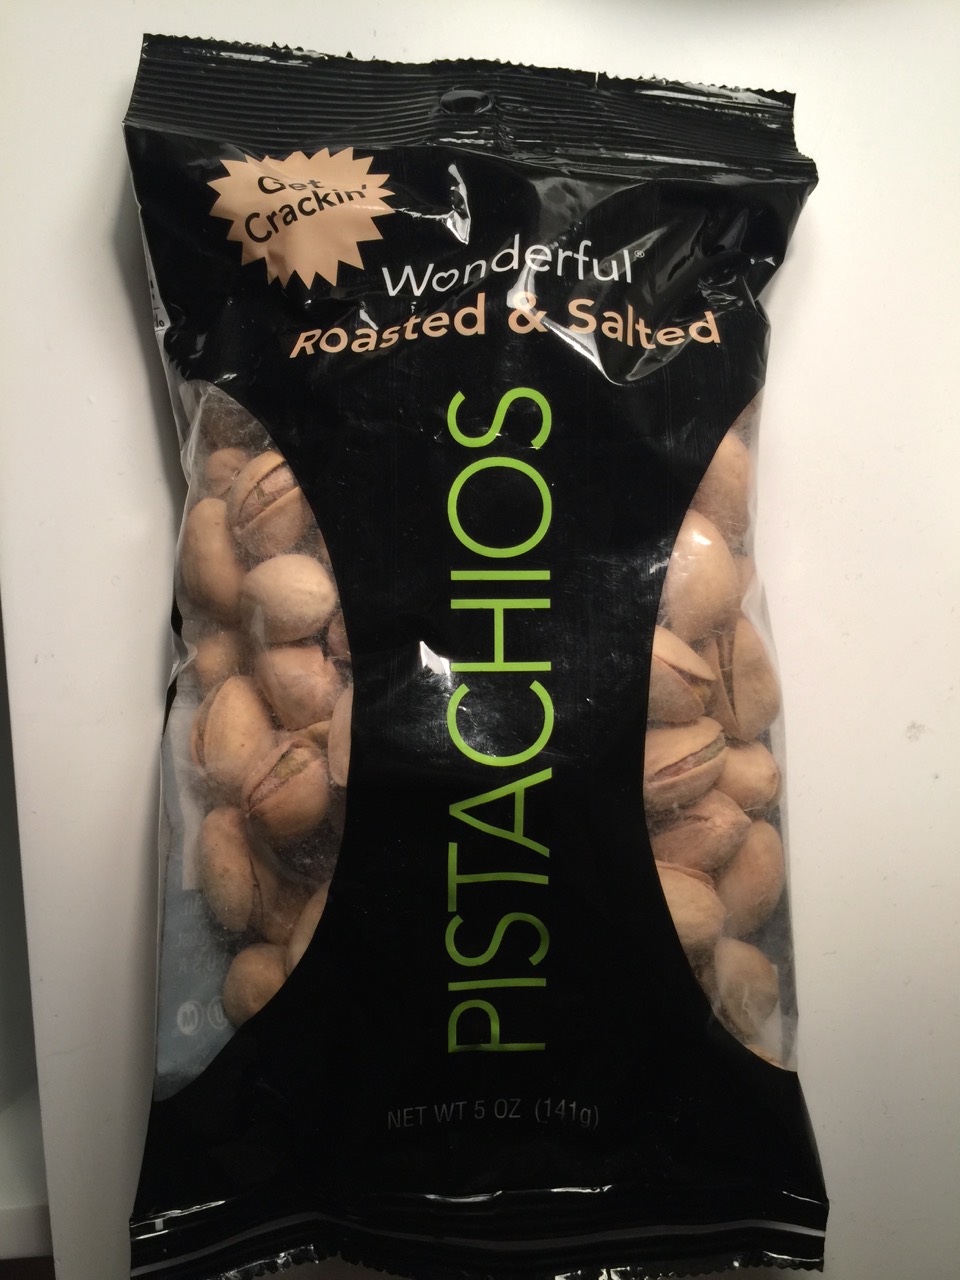 Wonderful Roasted & Salted Pistachios front packaging